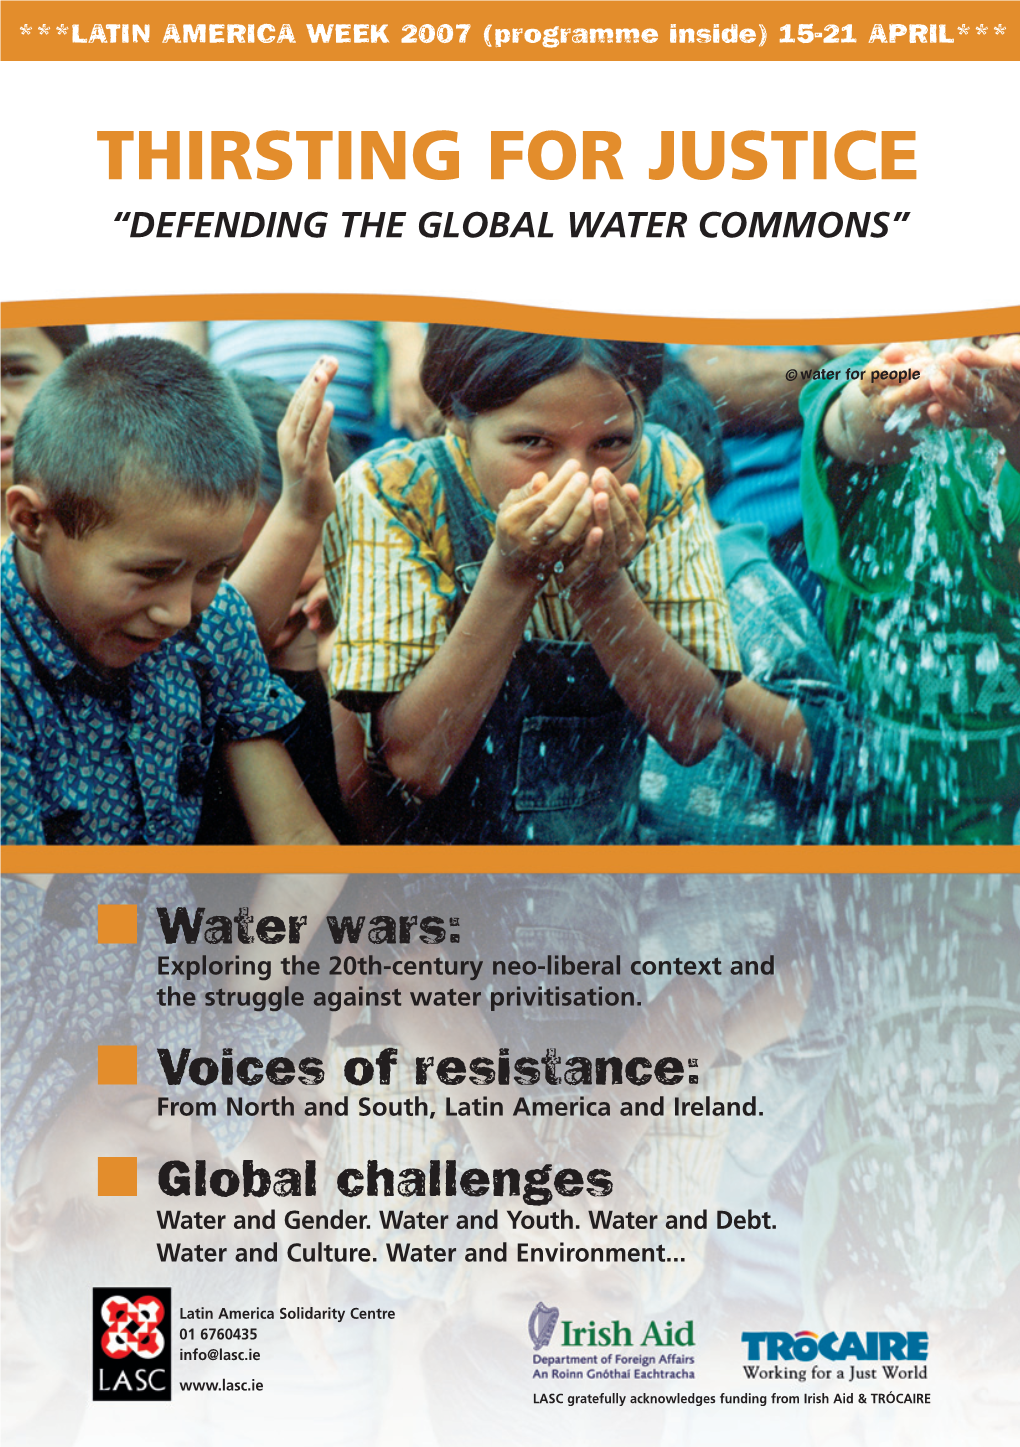 Thirsting for Justice “Defending the Global Water Commons”